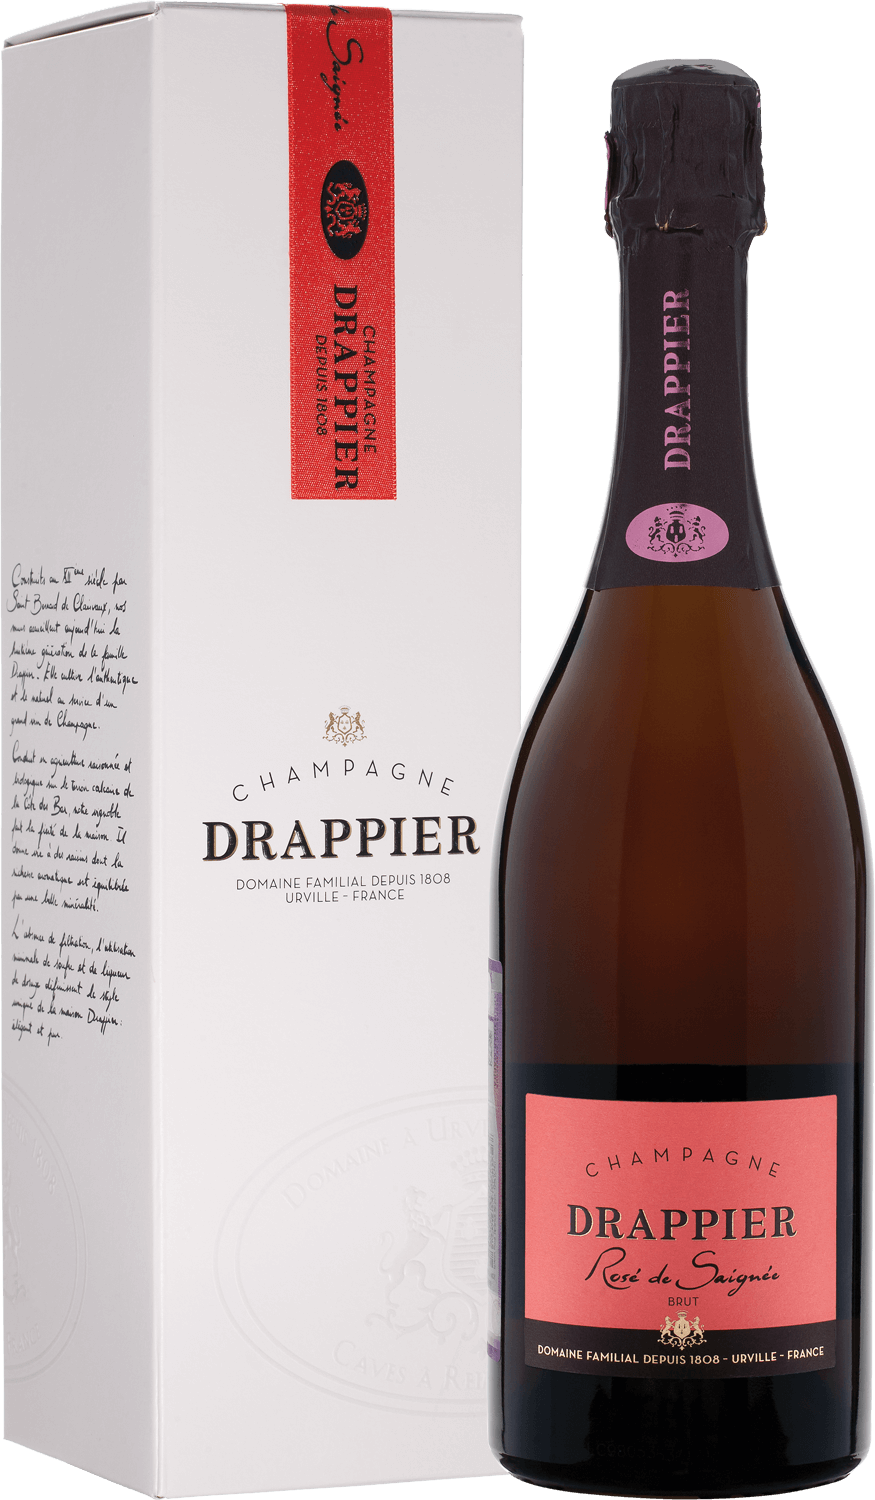 Drappier Brut Rose Champagne AOP in gift box pommery brut rose royal champagne aop